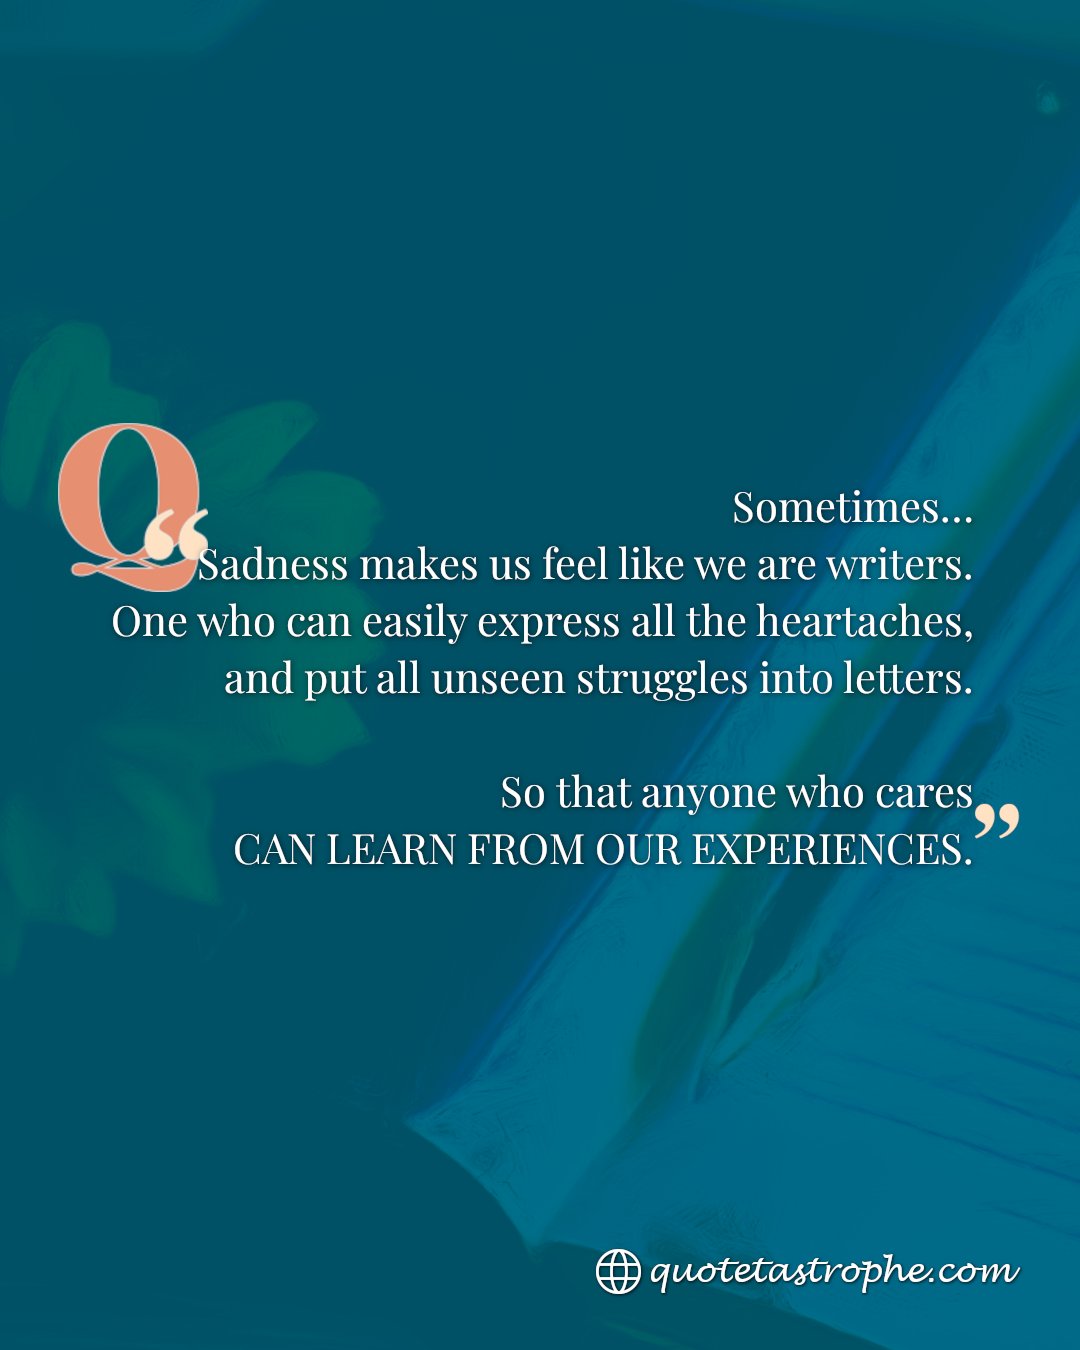 So That Anyone Who Cares Can Learn From Our Experiences